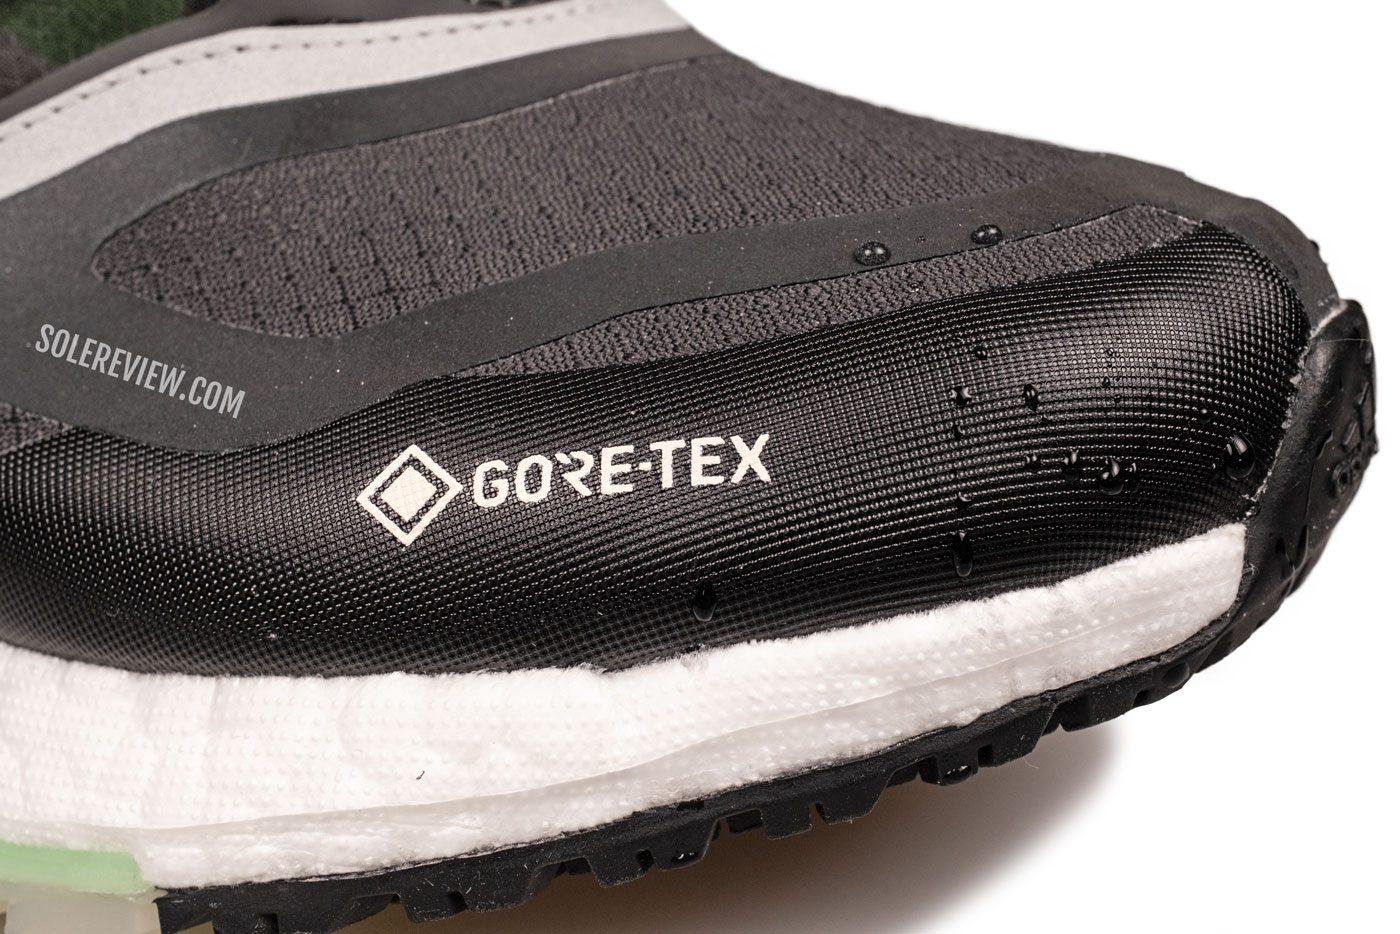 The toe-box of the adidas Ultraboost 22 Gore-Tex.